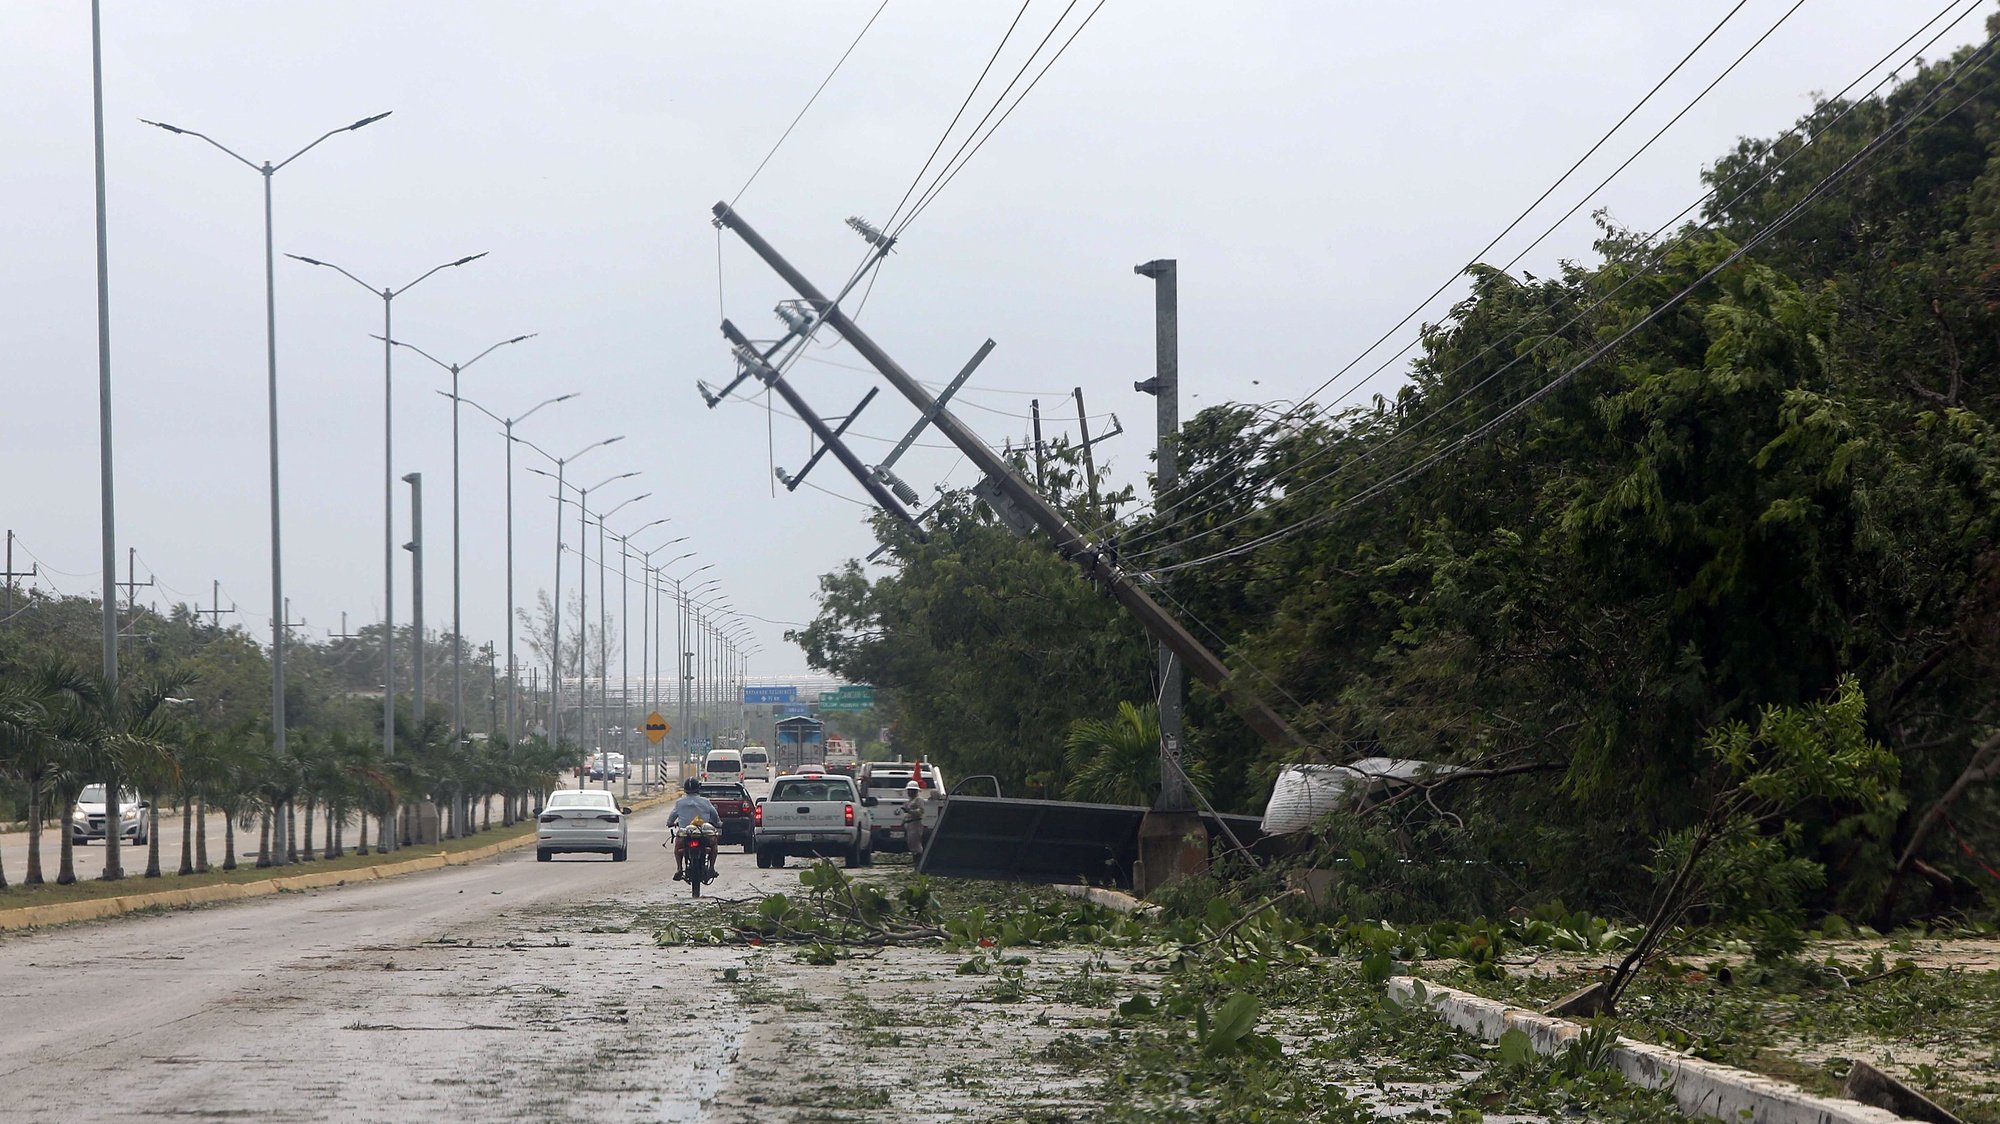 epa09421195 View of downed utility poles during Hurricane Grace in Quintana Roo state, Mexico, 19 August 2021. Hurricane Grace made landfall in the Mexican Caribbean, through the municipality of Tulum, bringing heavy rains.  EPA/Alonso Cupul